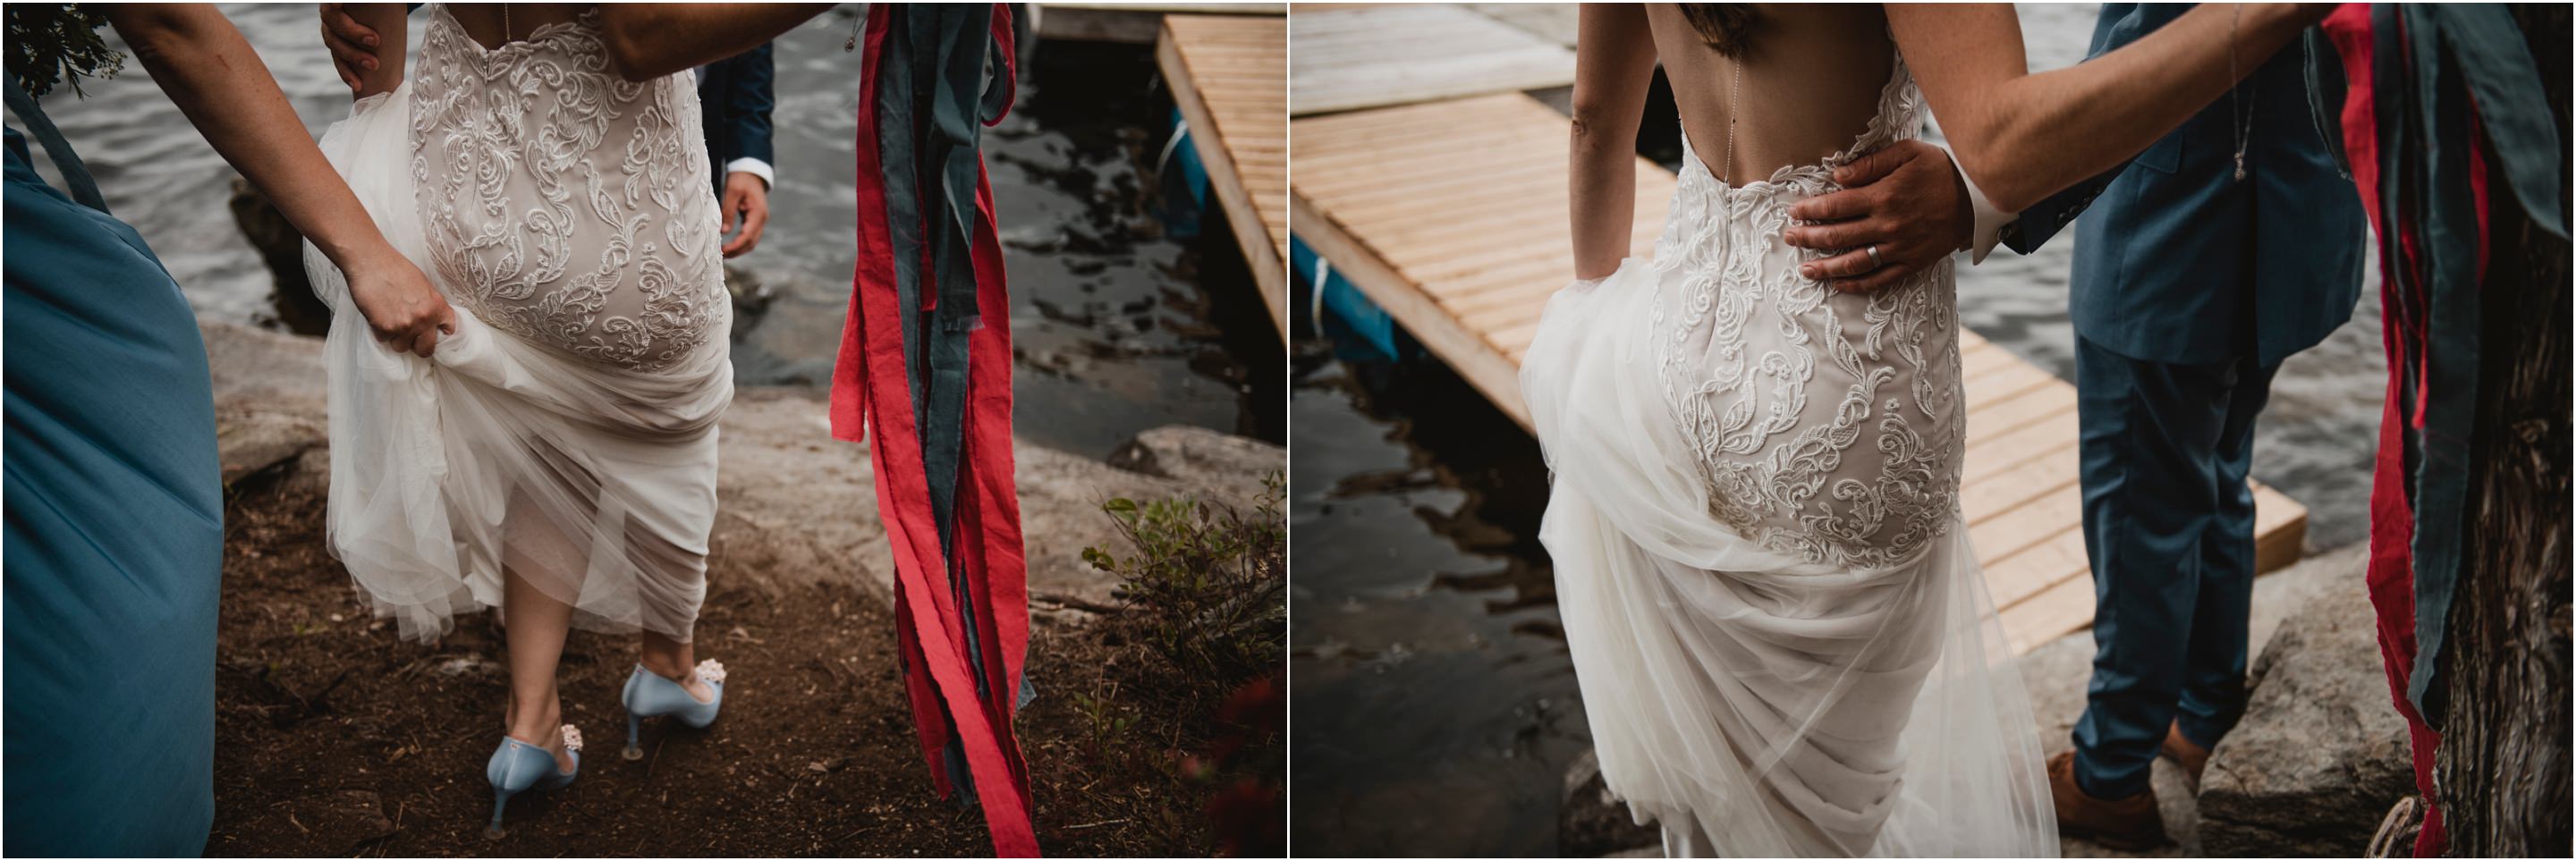 Wilderness Tours Wedding - Cindy Lottes Photography